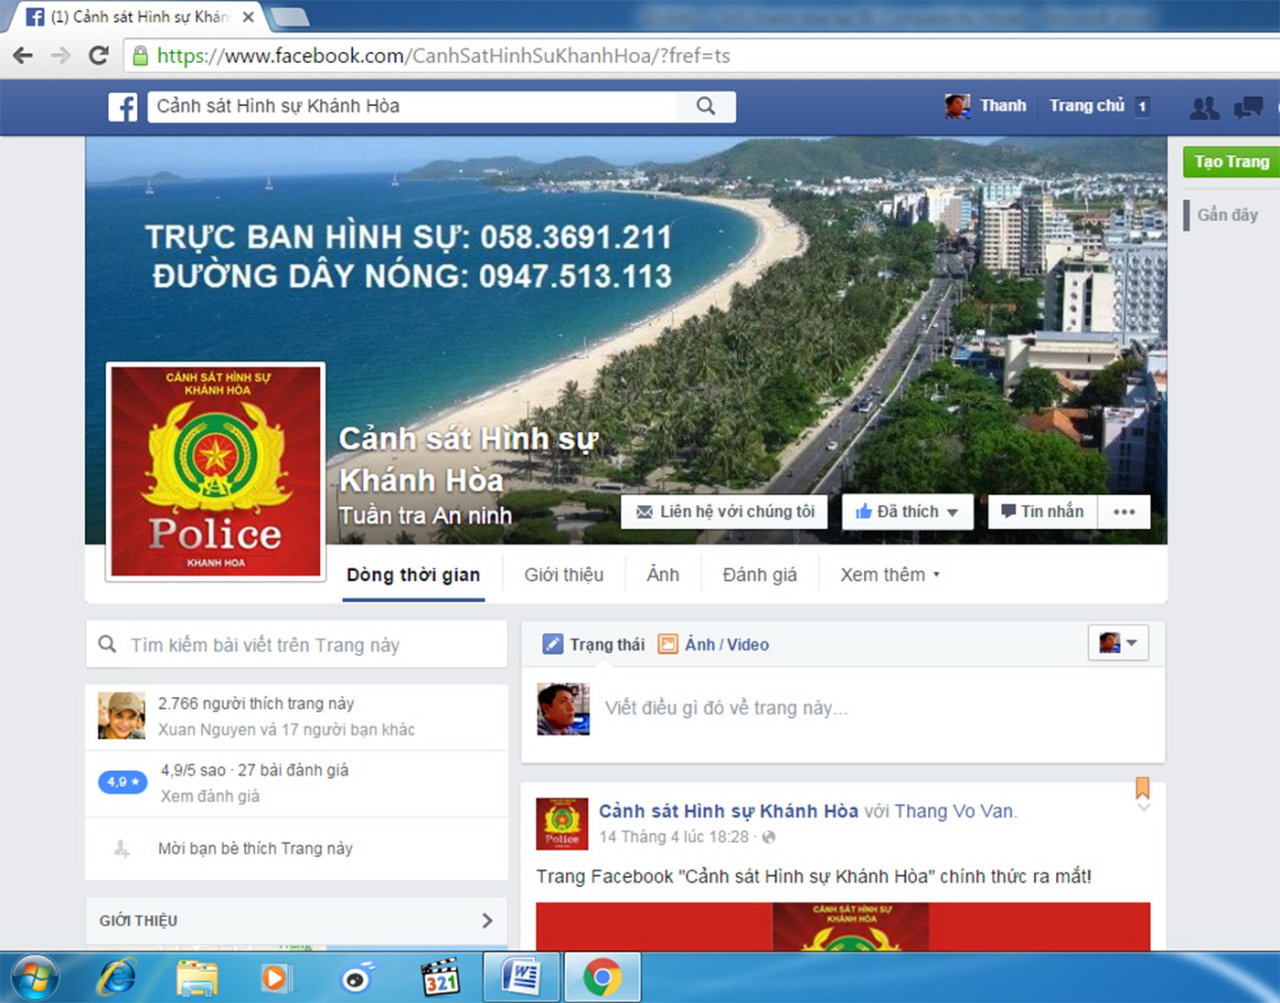 In Vietnam, police set up Facebook page to tackle crime